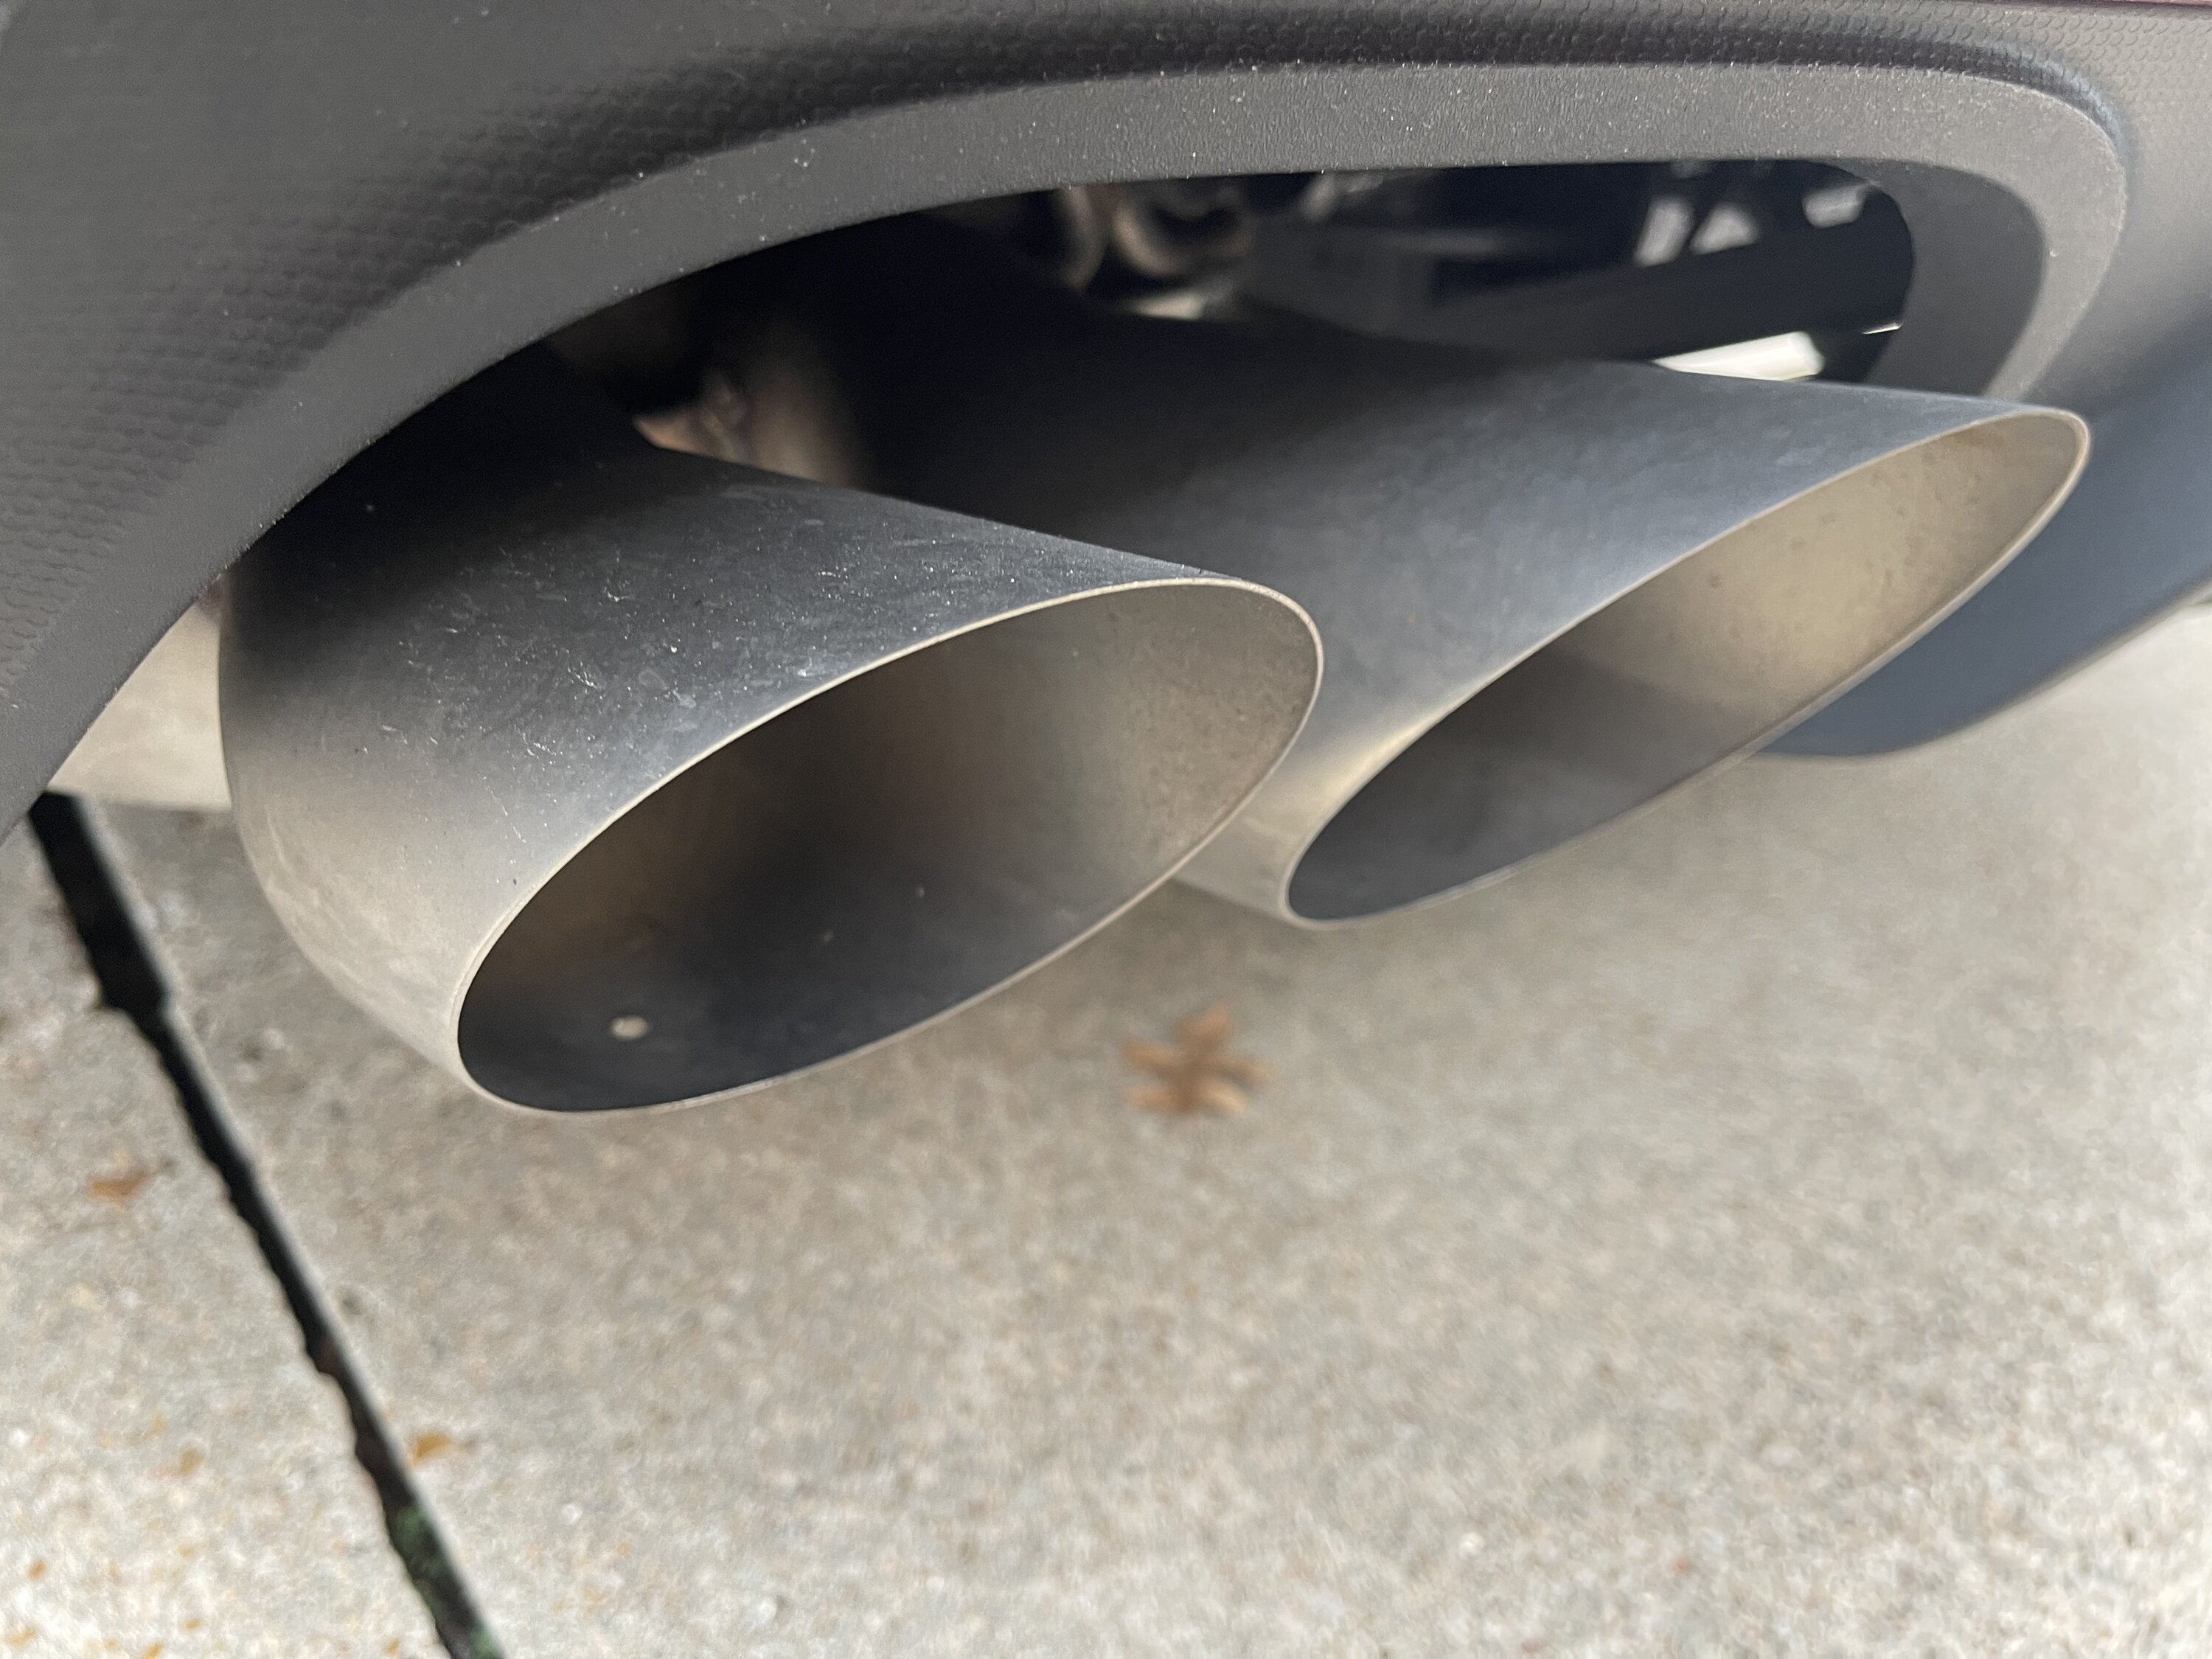 A Quick Tip on Cleaning Exhaust Tips! Mothers Mag & Aluminum